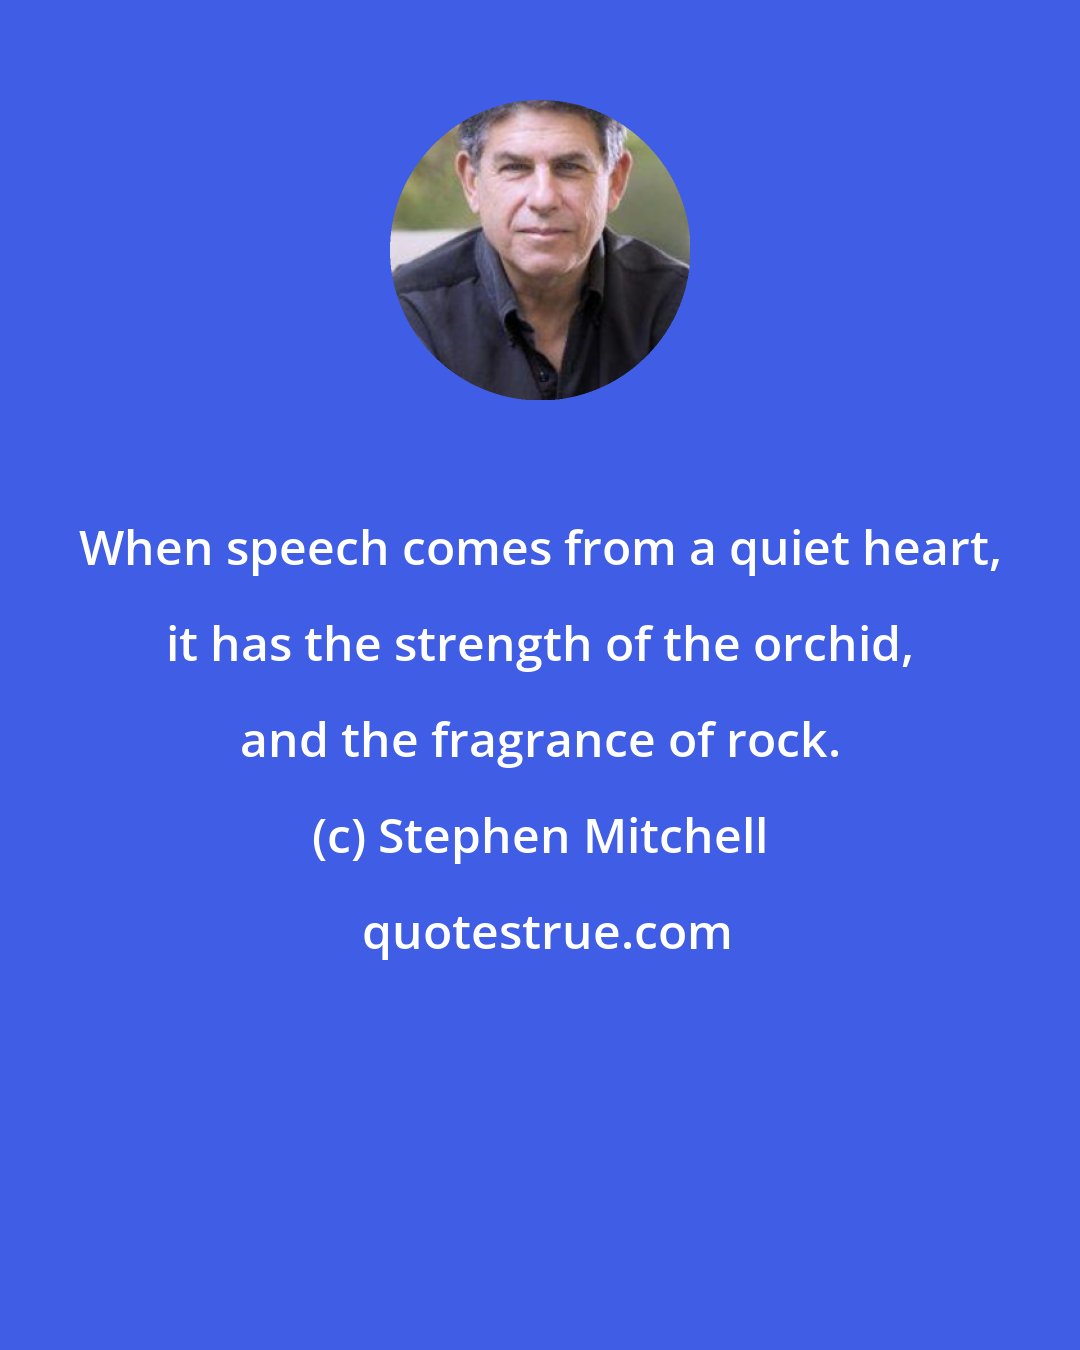 Stephen Mitchell: When speech comes from a quiet heart, it has the strength of the orchid, and the fragrance of rock.